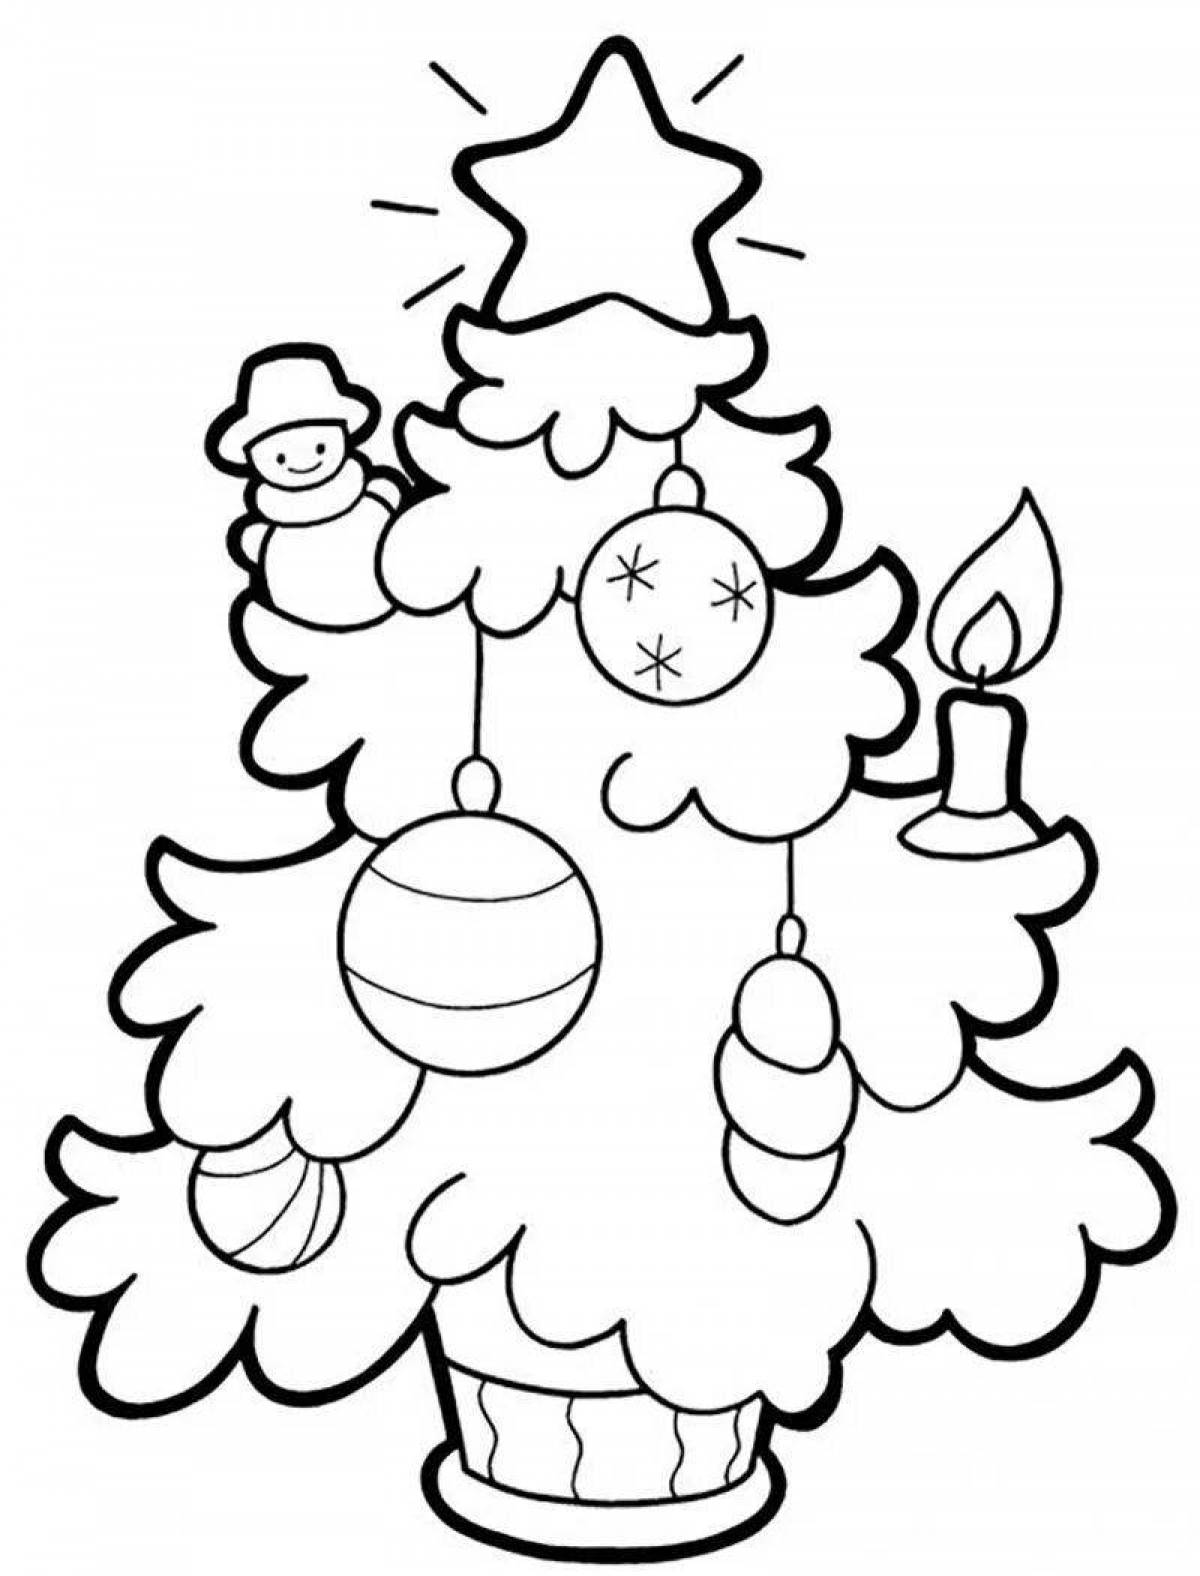 Decorated Christmas tree coloring book for kids